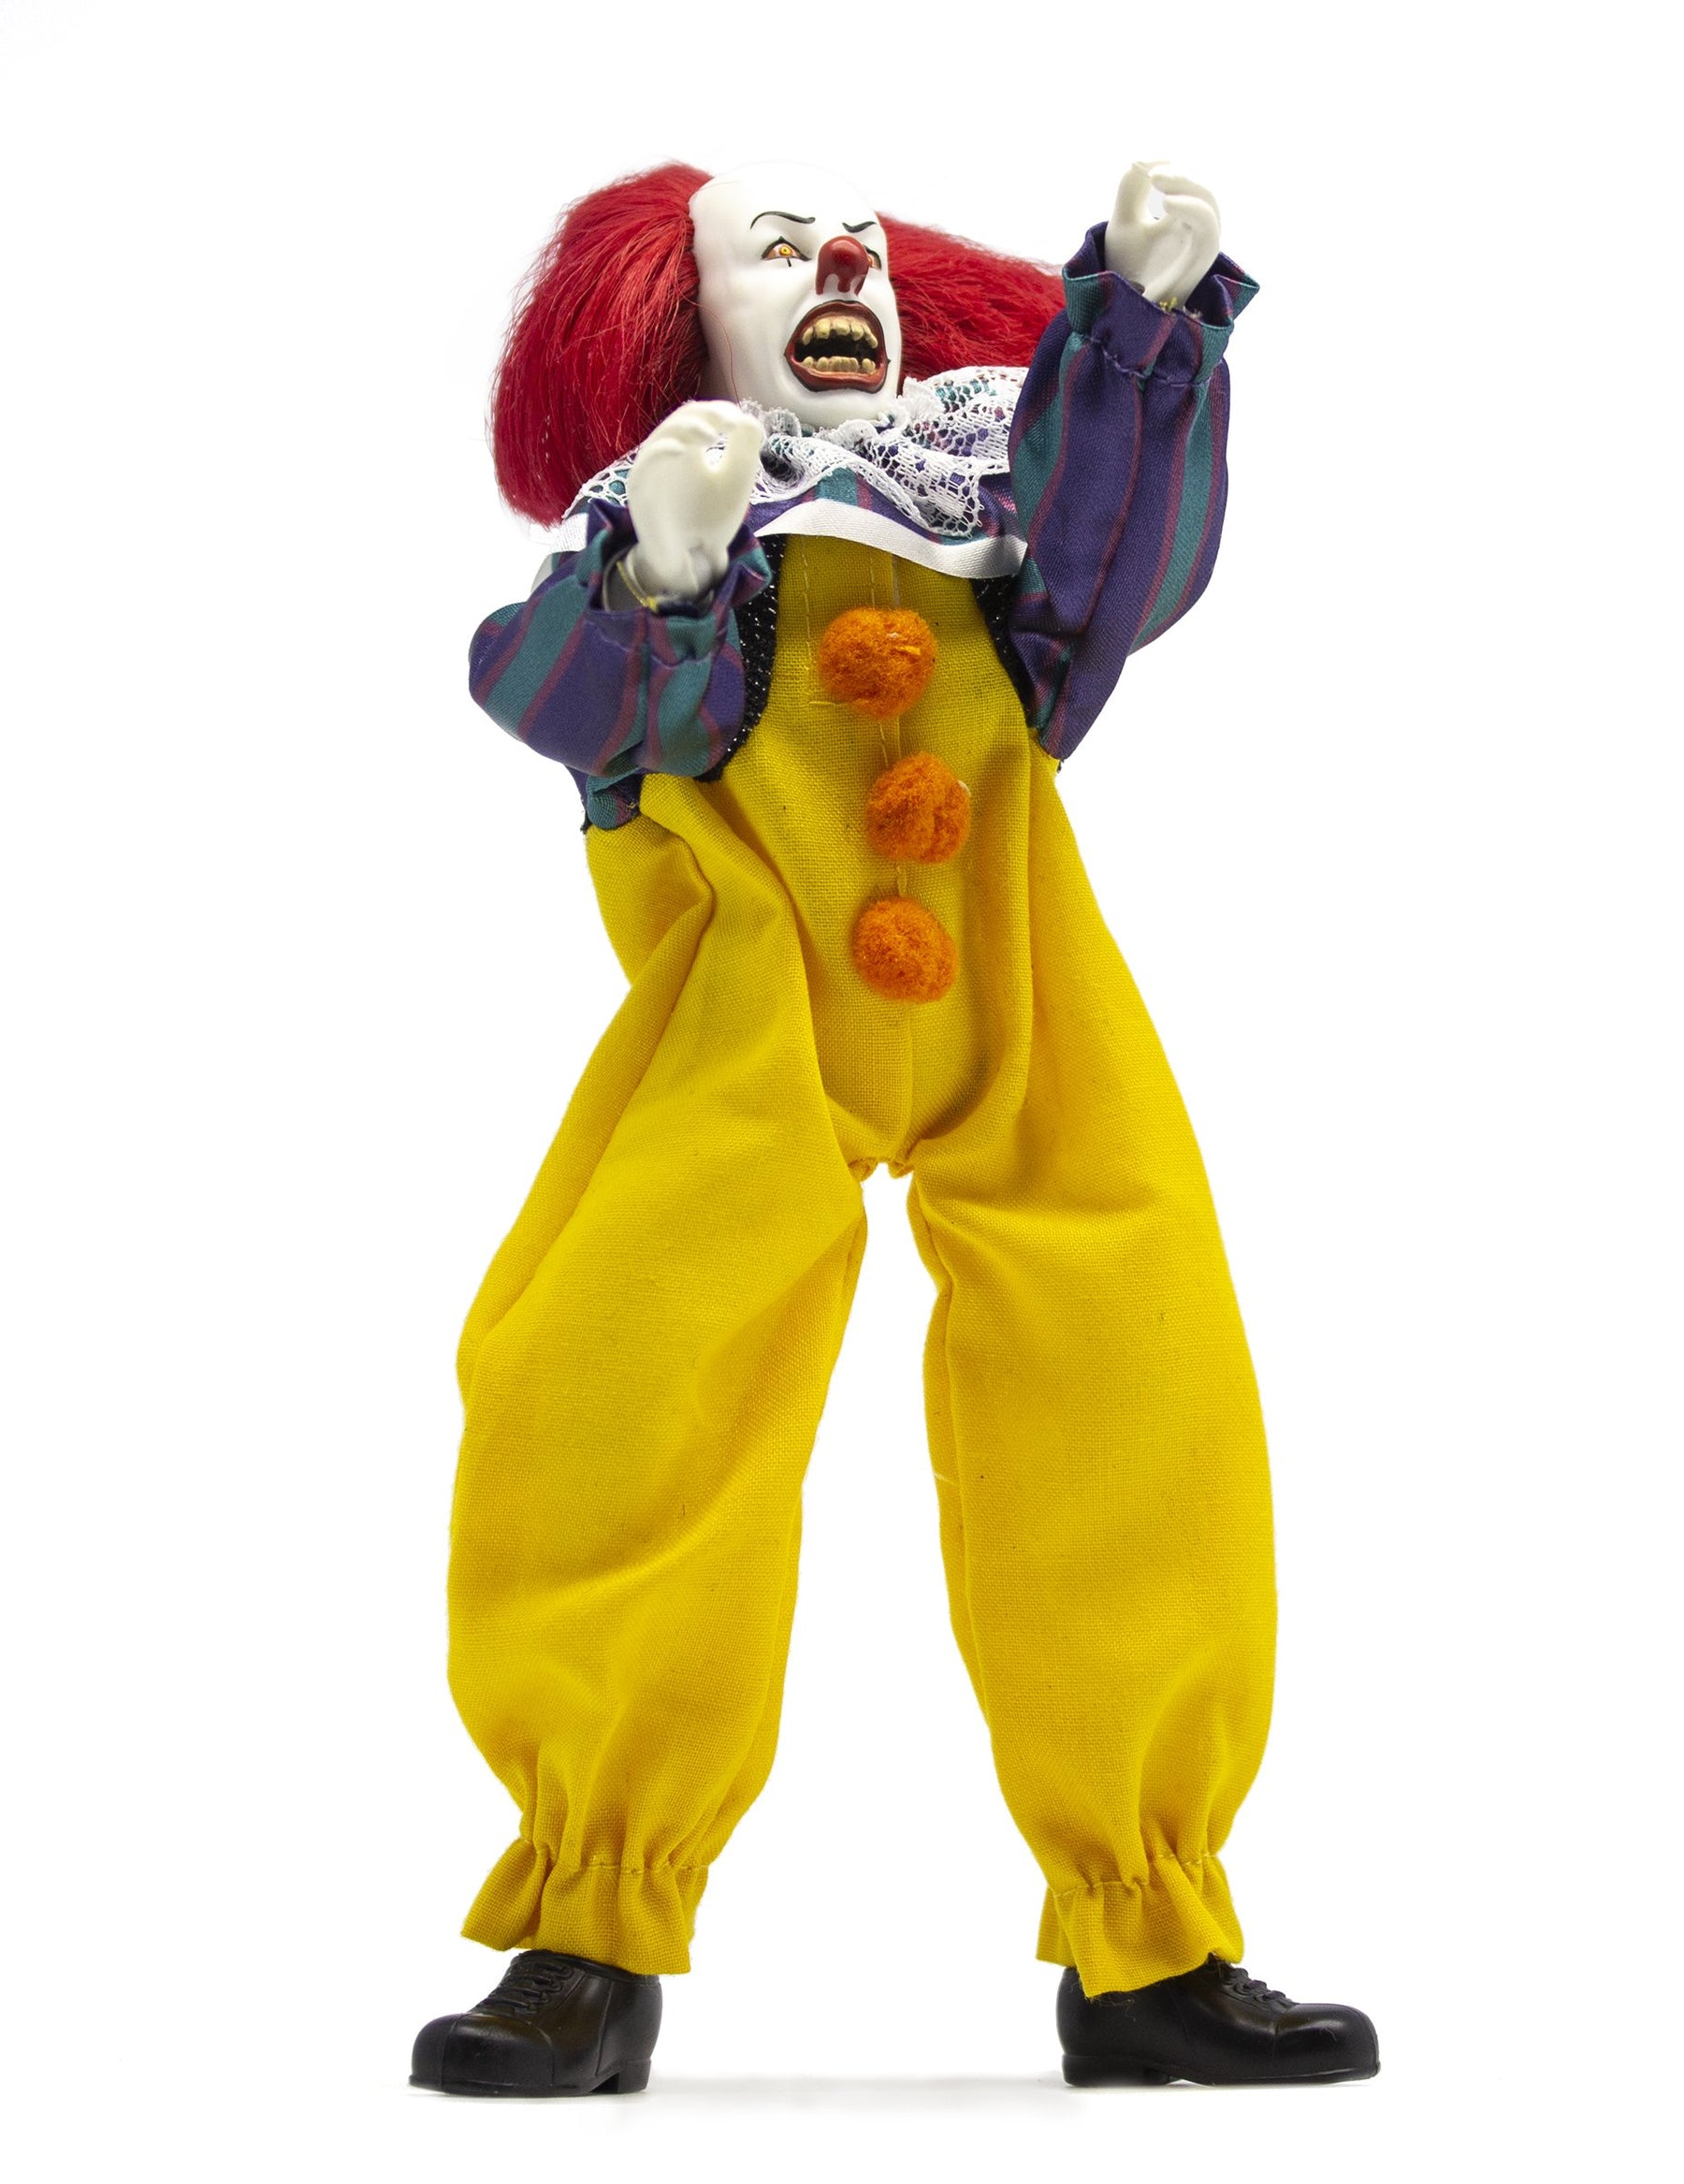 Mego Horror Wave 7 - It Pennywise 8" Action Figure - Zlc Collectibles